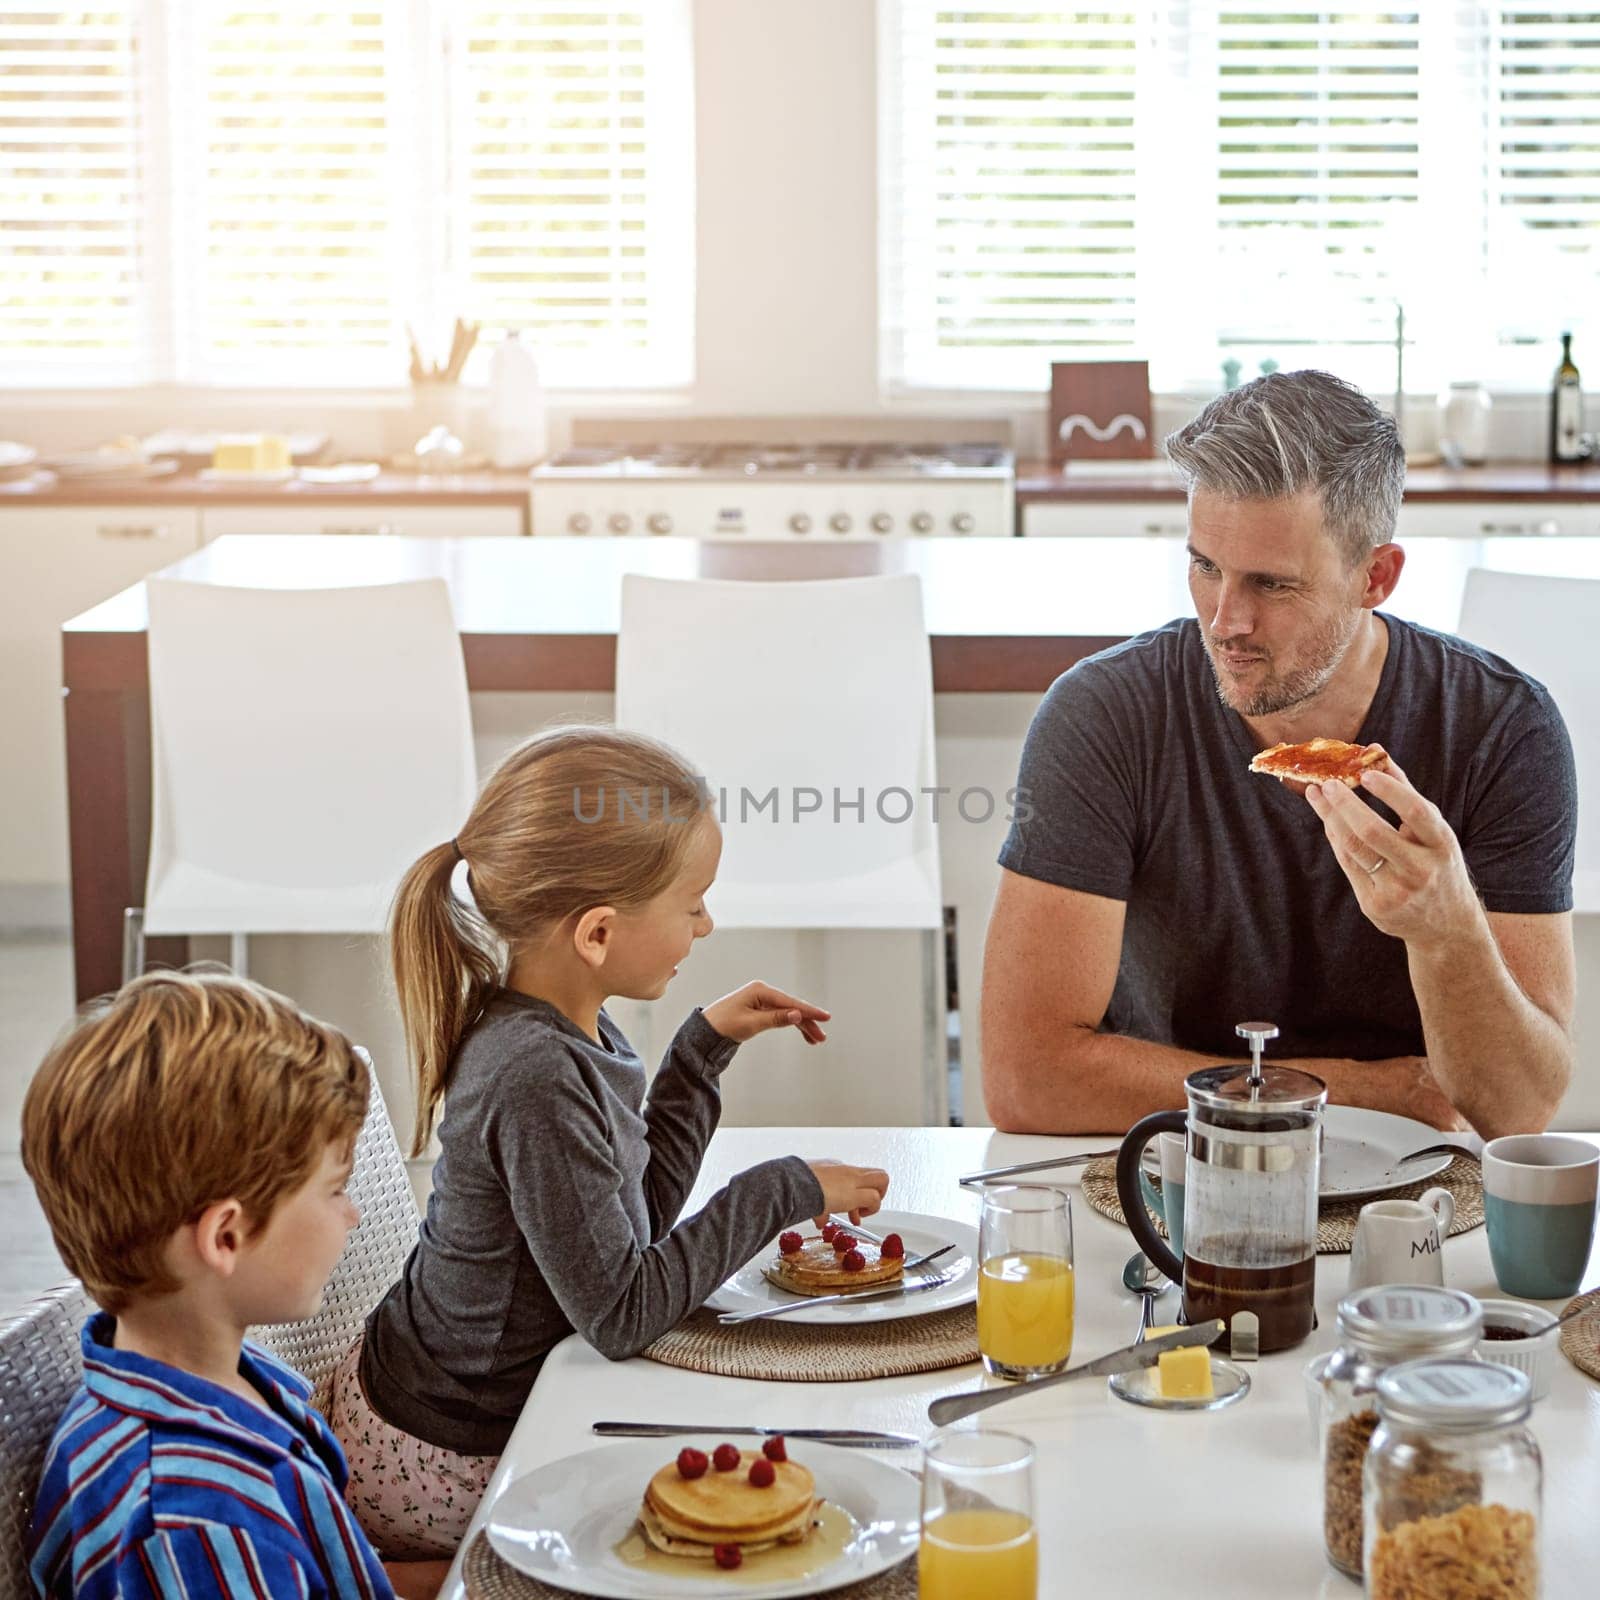 Hes a hands-on dad. a family having breakfast together